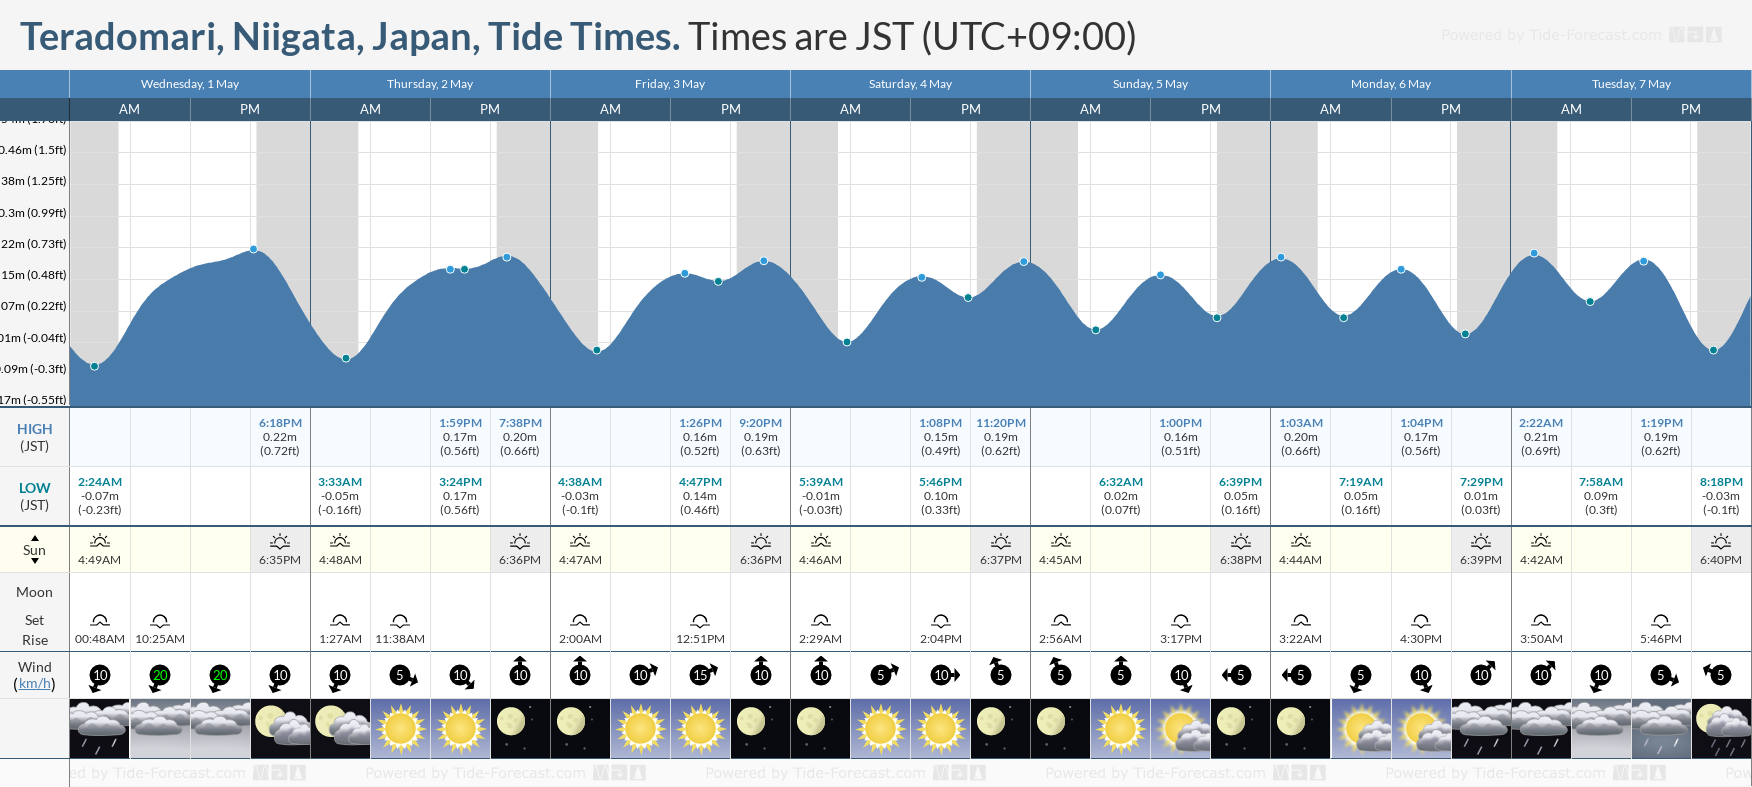 Teradomari, Niigata, Japan Tide Chart including high and low tide tide times for the next 7 days